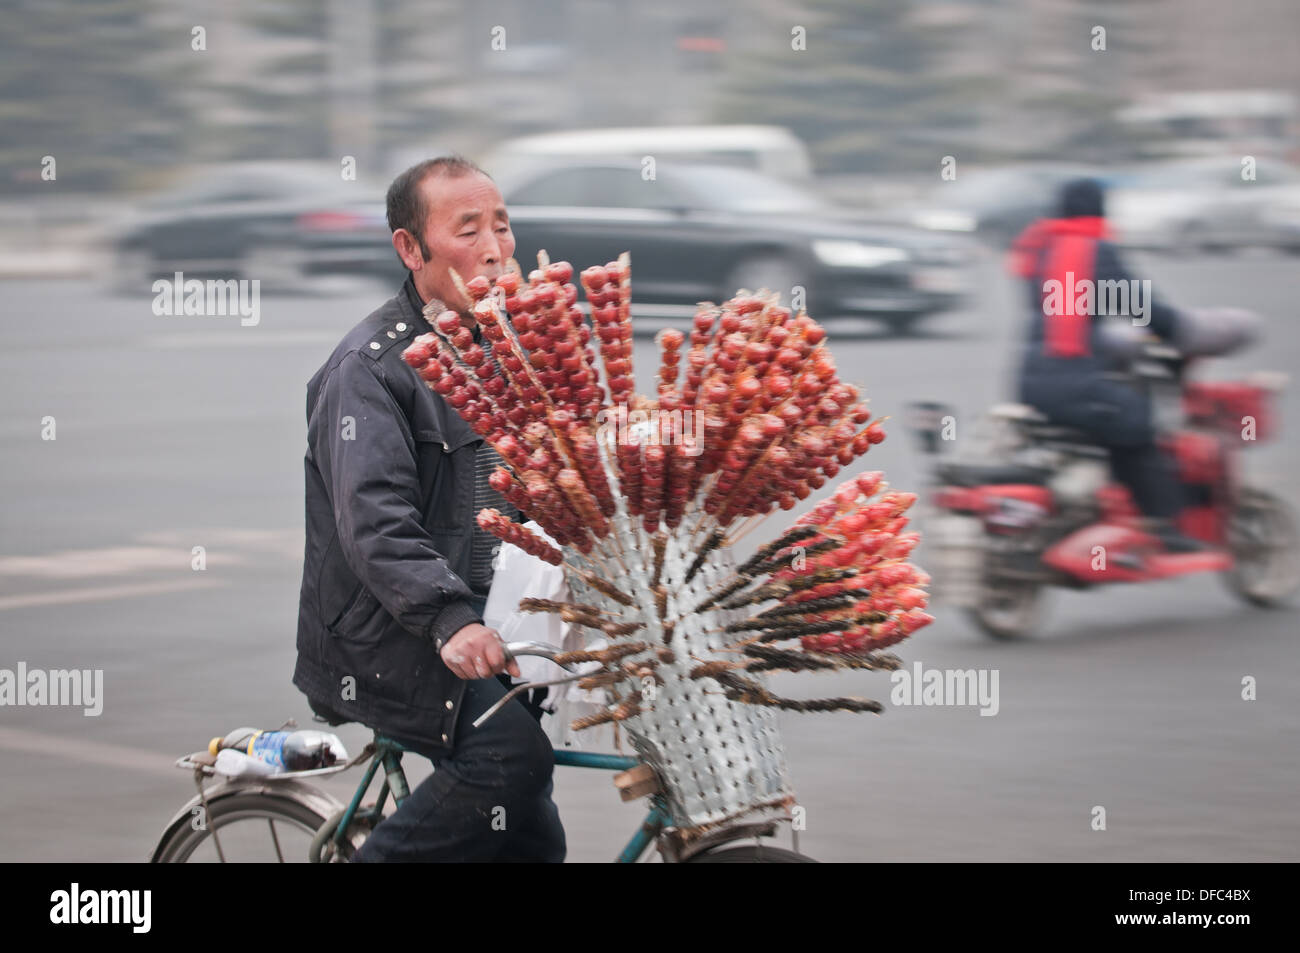 Man riding bike with Candied fruit on a stick (also called crystallized fruit or glace fruit) in Beijing, China Stock Photo